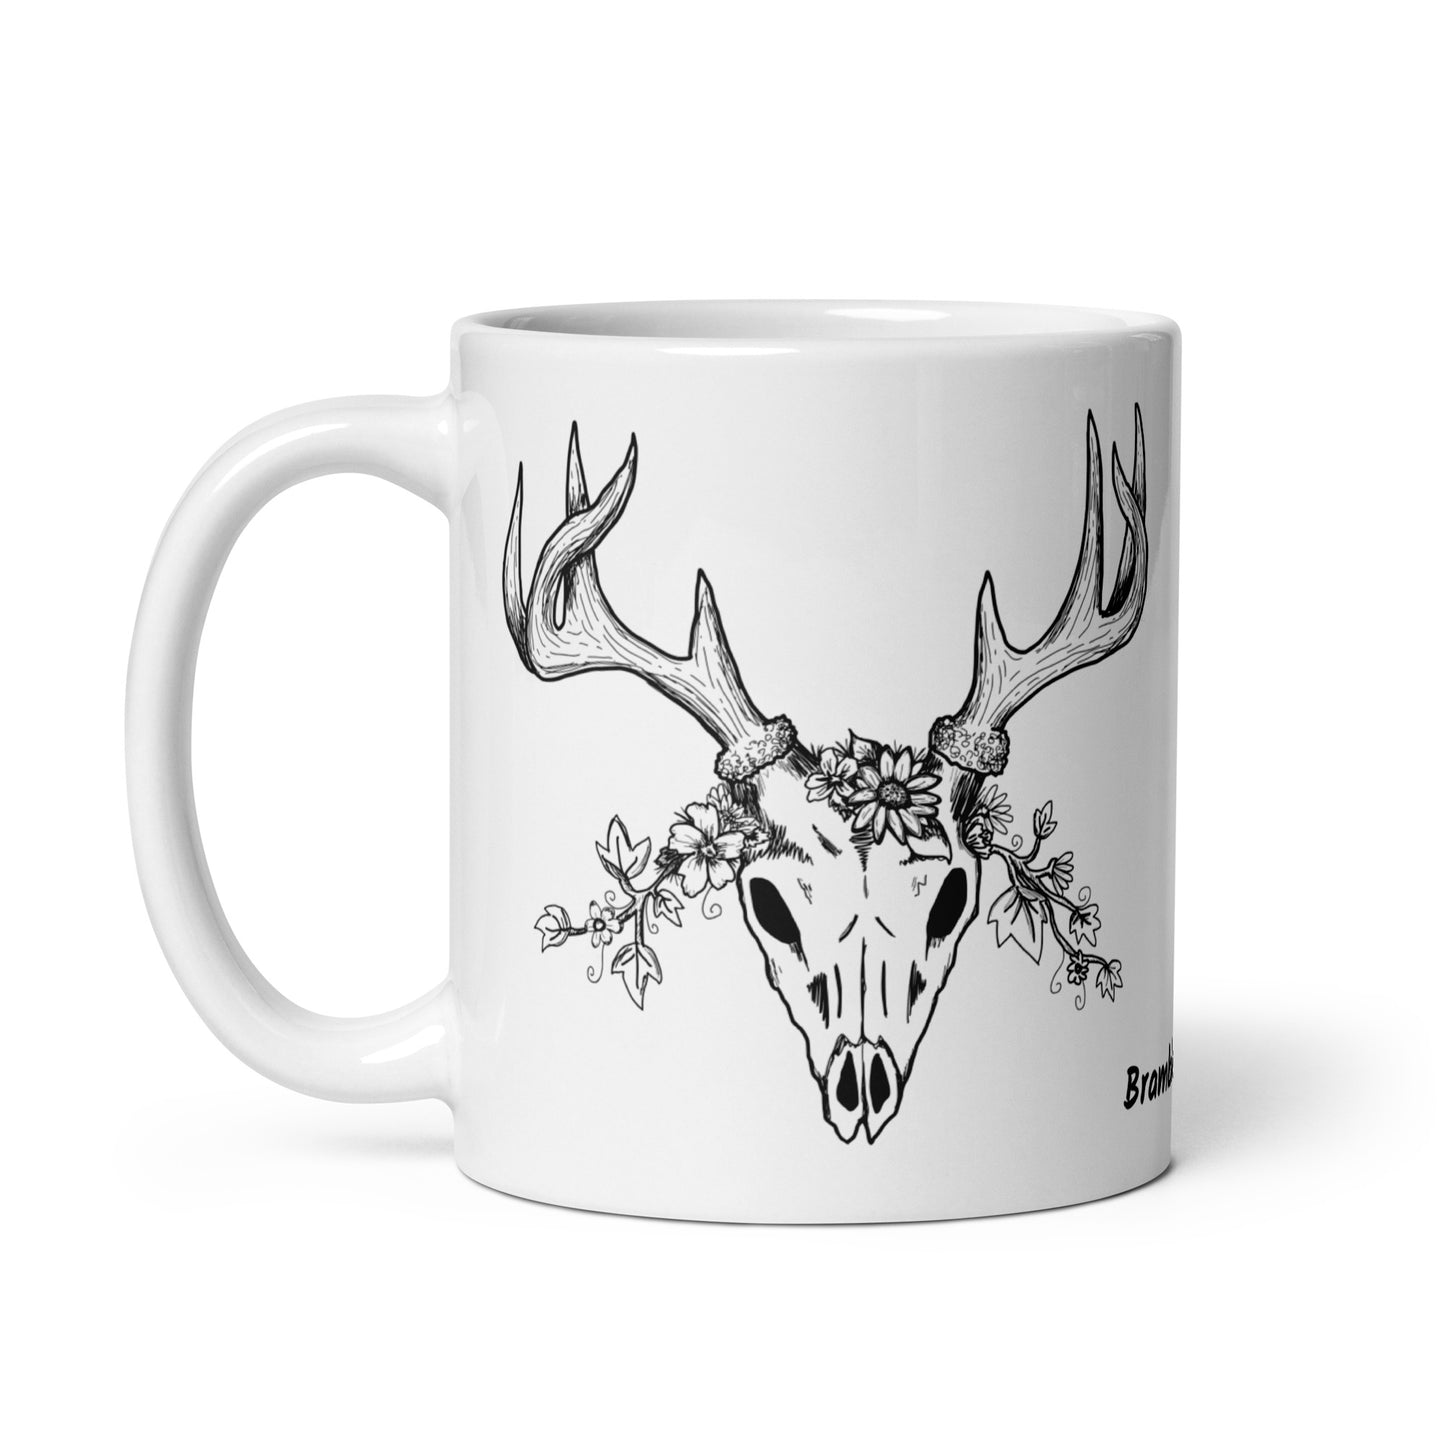 11 oz white ceramic mug. Features a double-sided hand illustrated image of a deer skull wreathed in flowers.